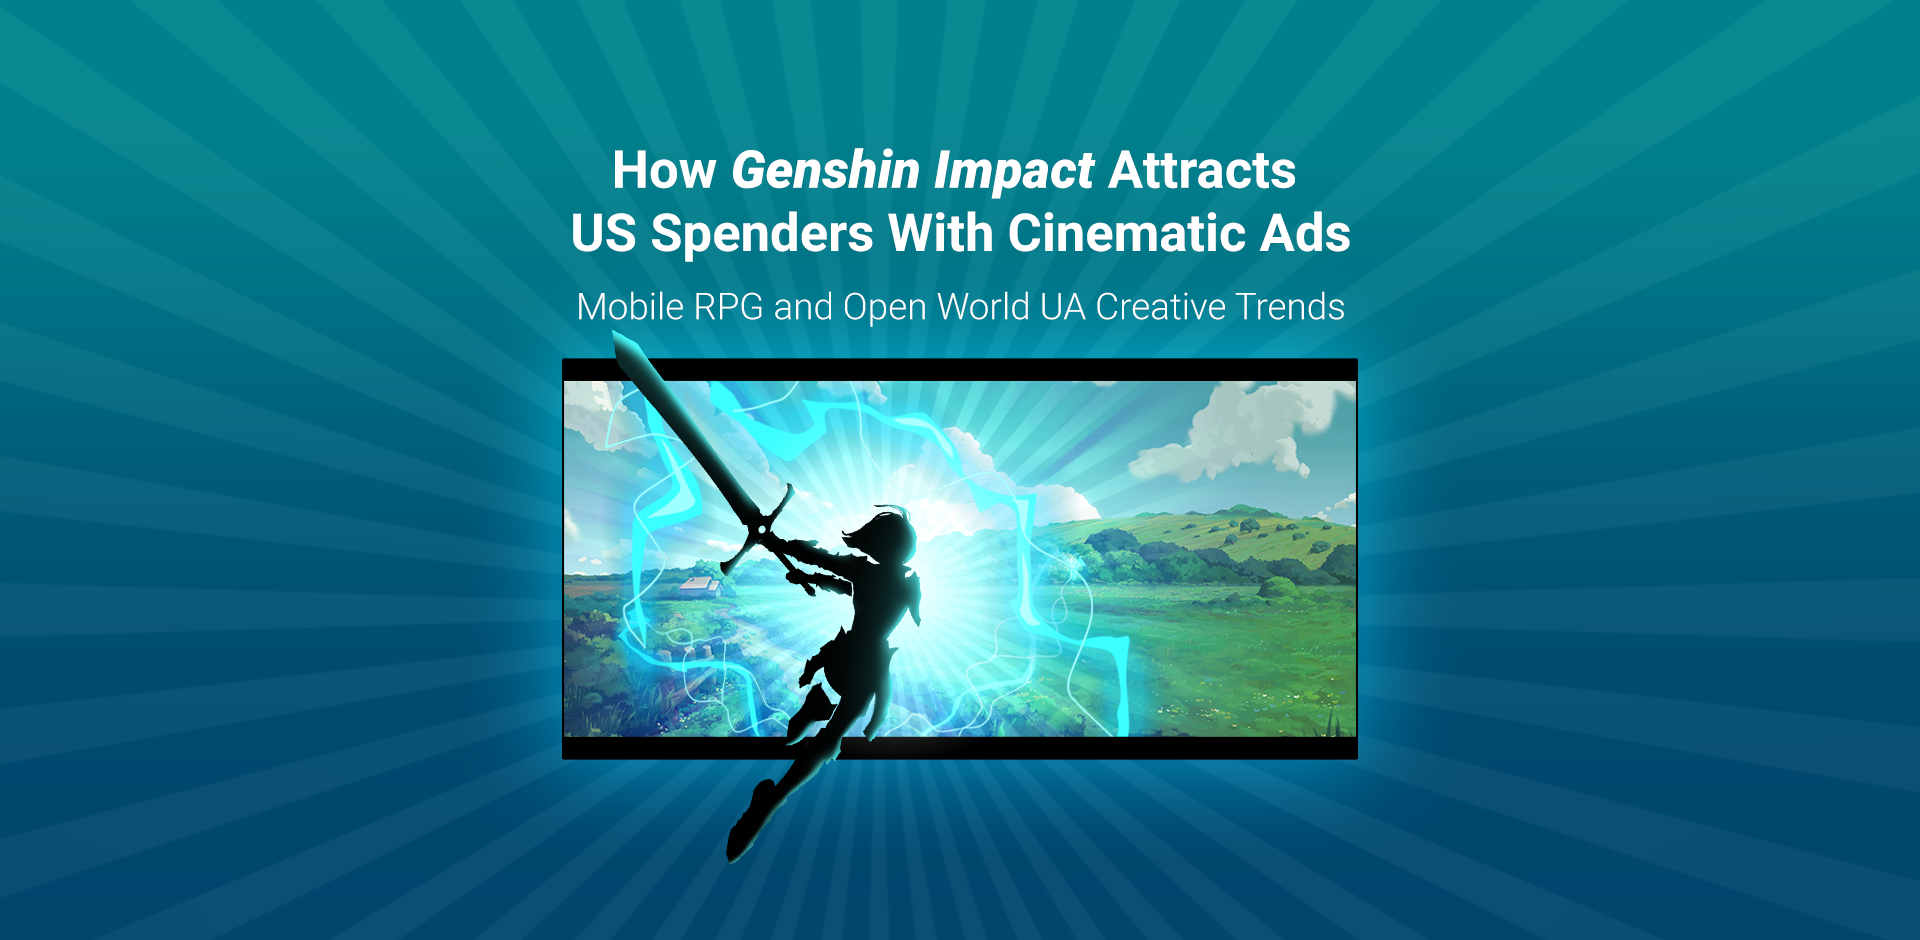 How Genshin Impact Attracts US Spenders with Cinematic Ads